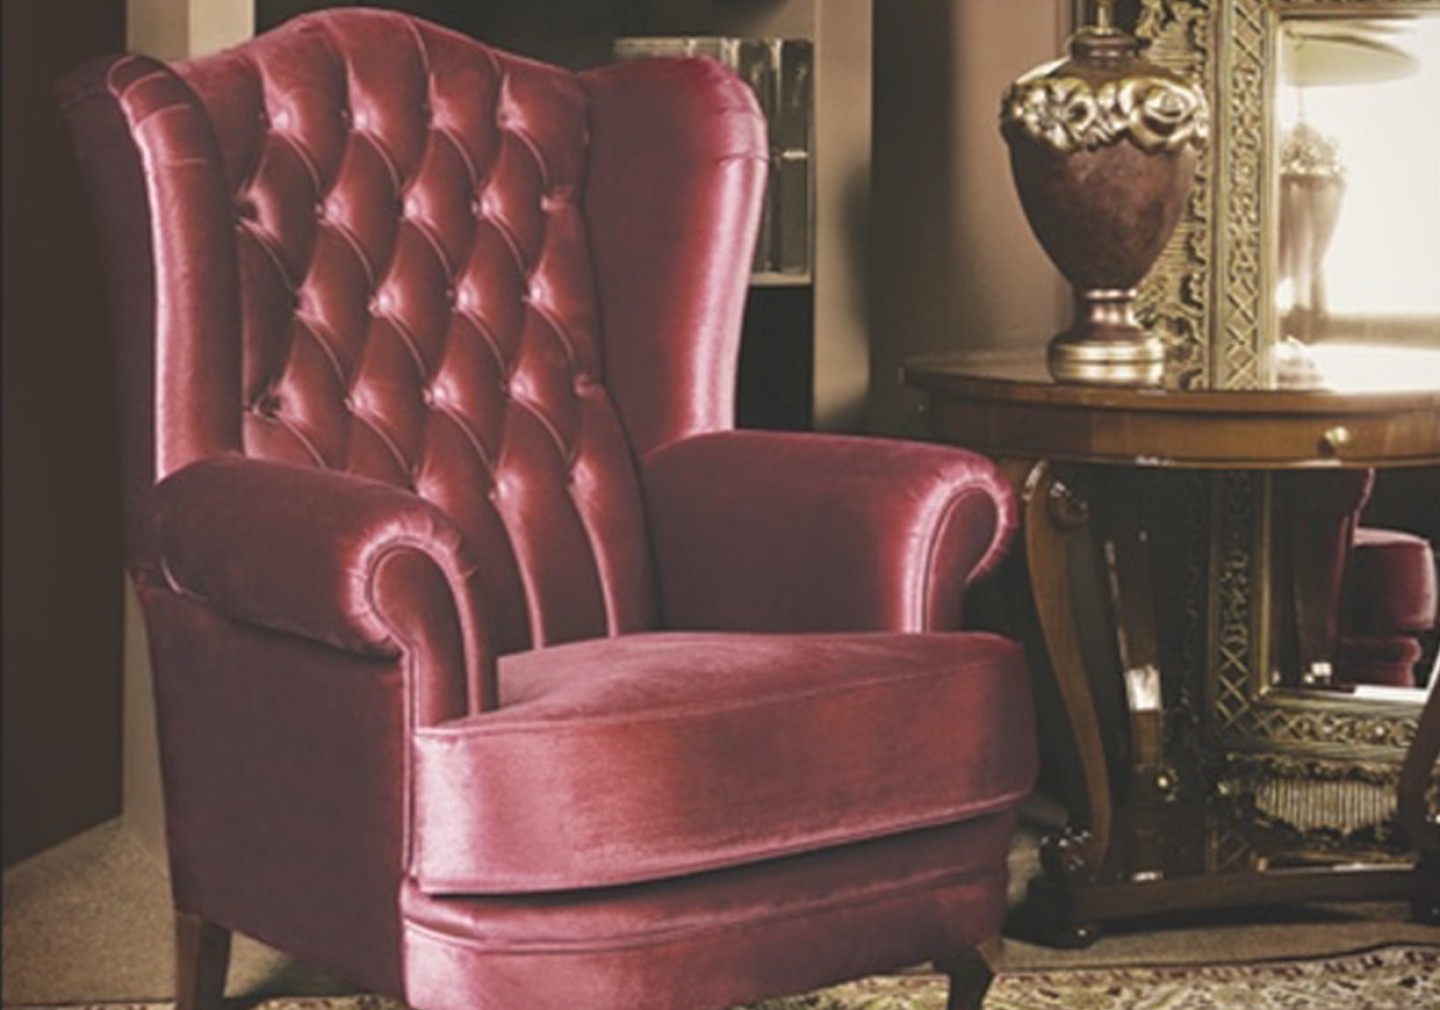 THE ASCOT CLASSIC ARMCHAIR